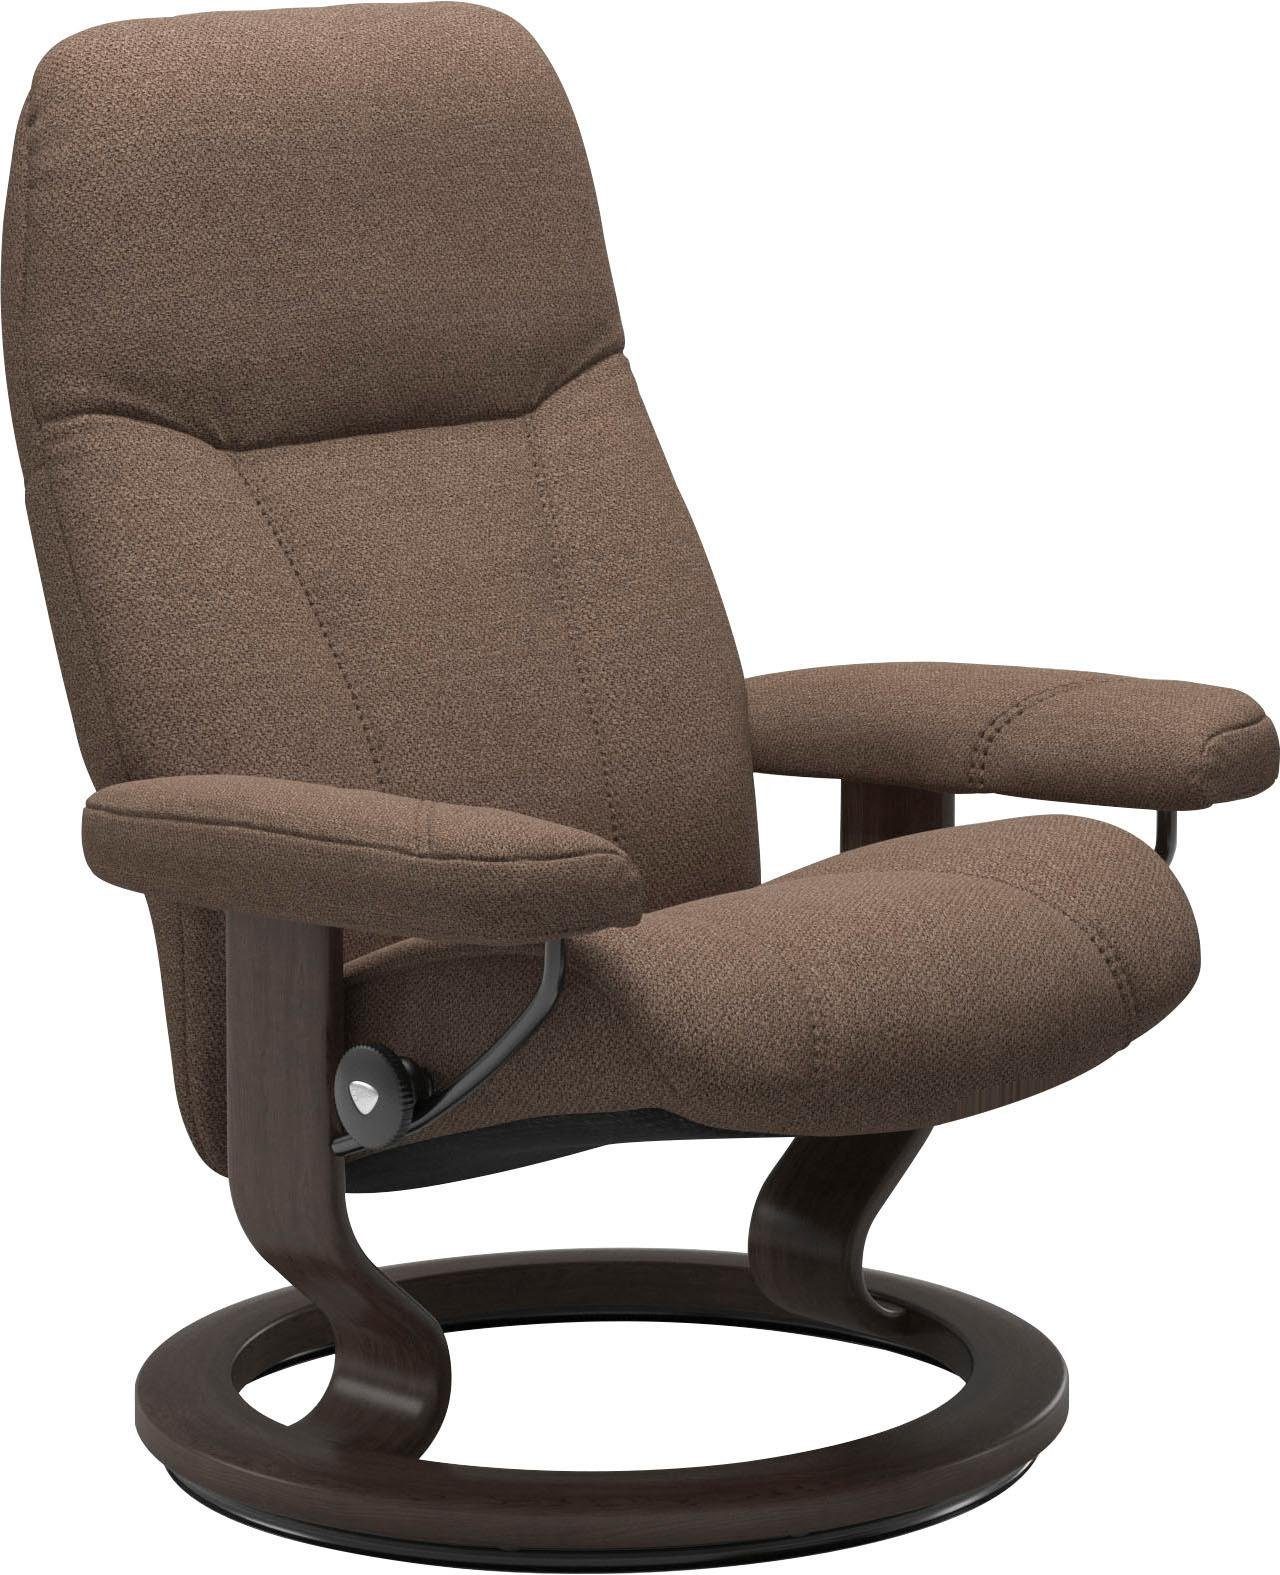 Stressless® Relaxsessel Gestell mit Größe Consul, Classic M, Wenge Base